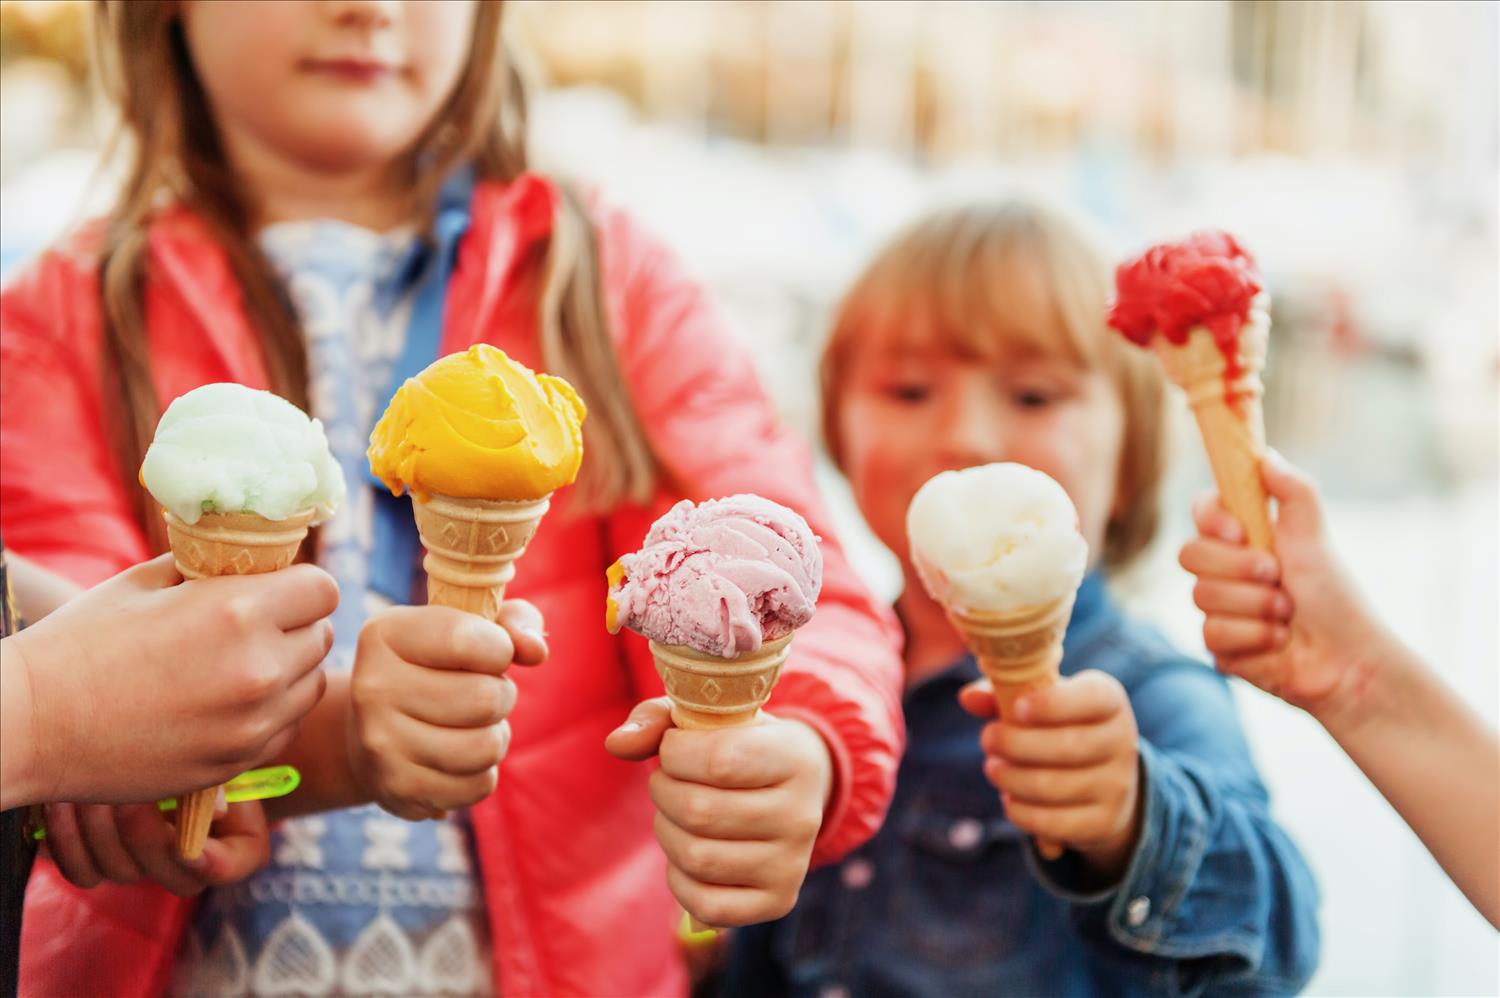 young children carrying bright coloured ice creams